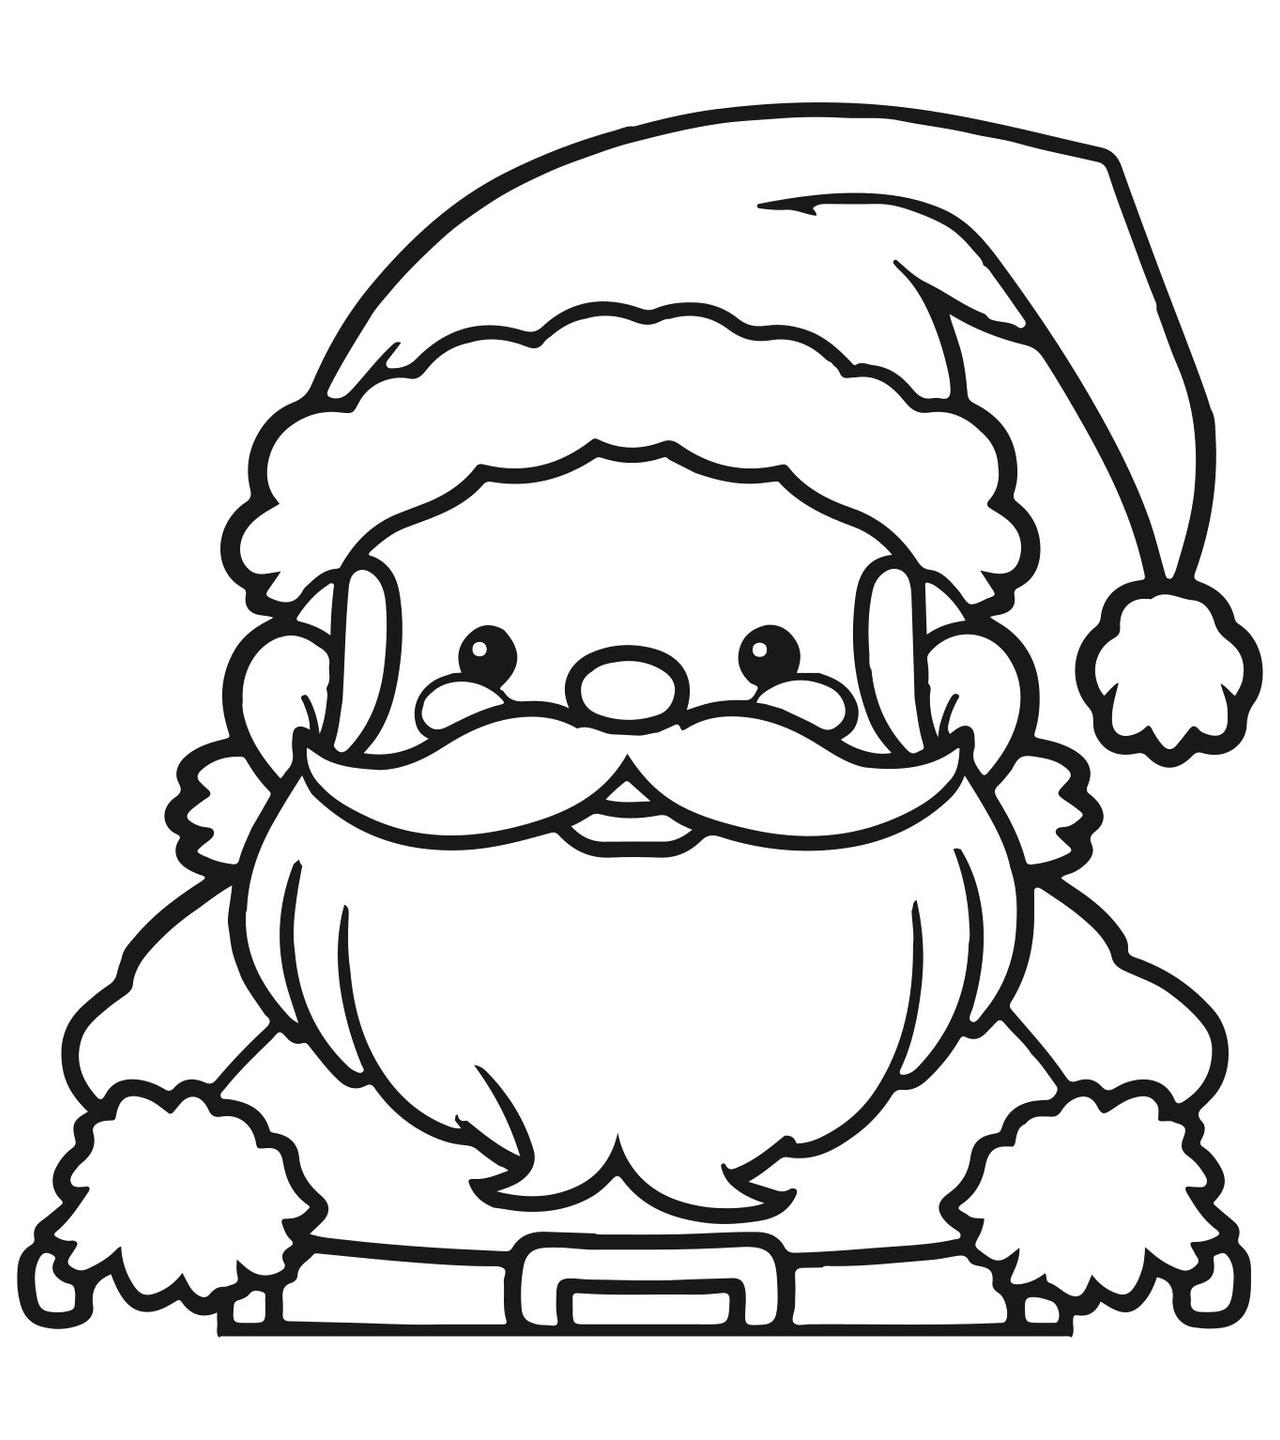 Printable Santa Claus - Coloring Page for kids.